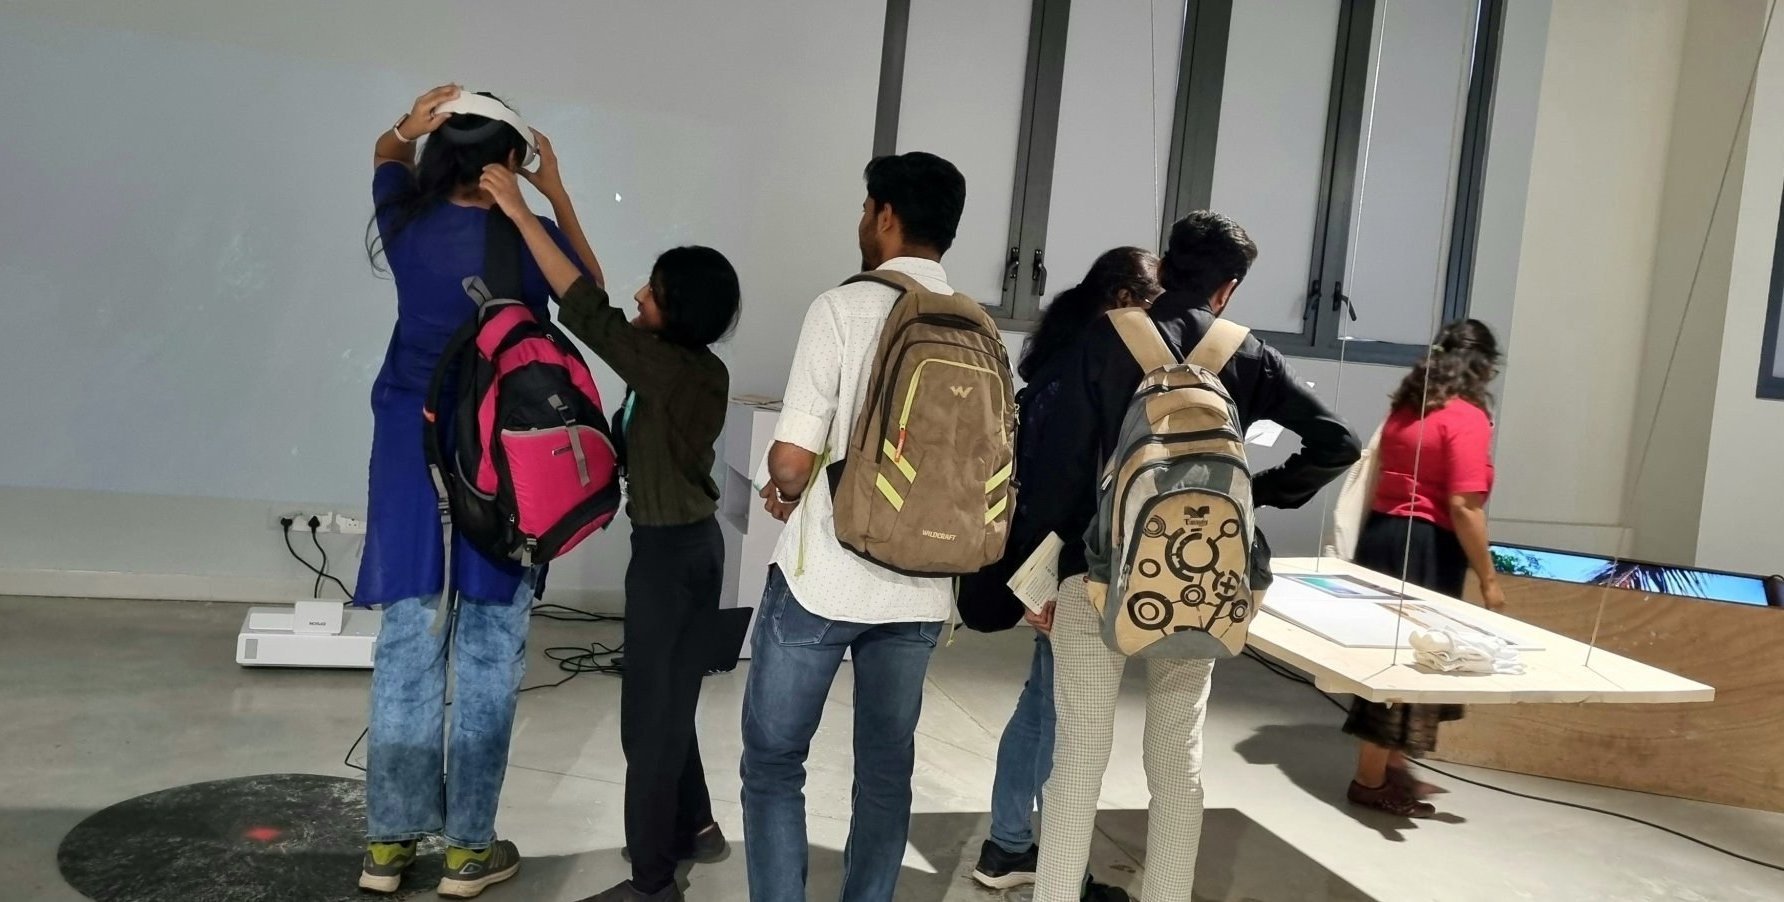 Visitors interacting with the exhibits at the Critical Zones exhibition. Picture Credit: Sindhu M.